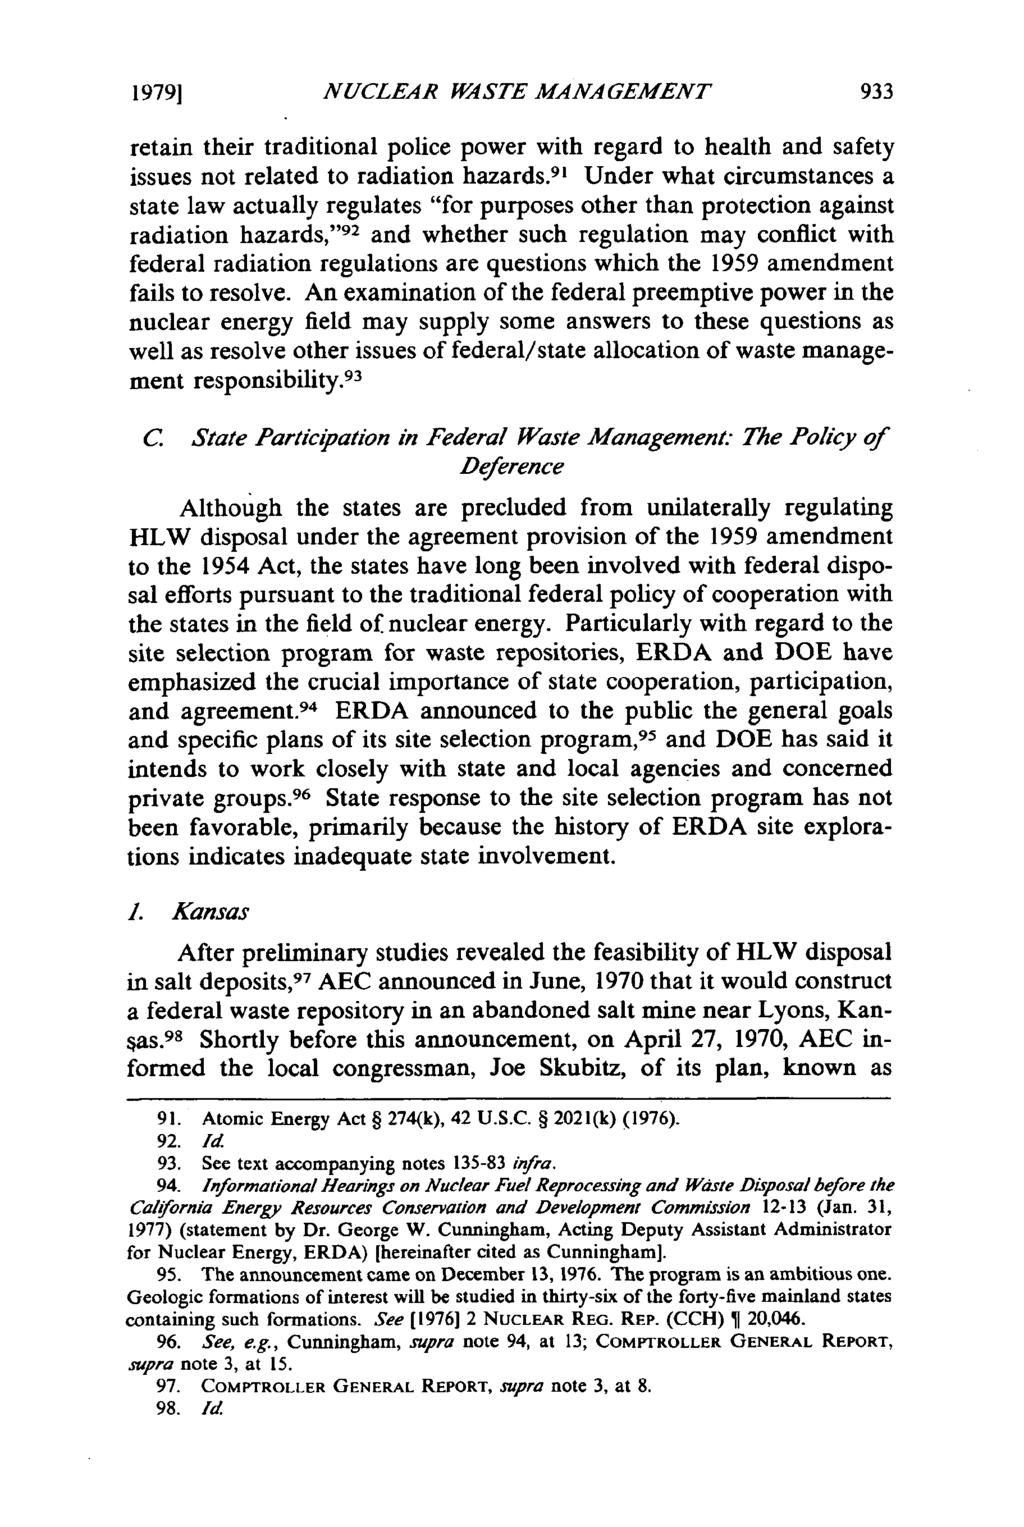 19791 NUCLEAR WASTE MANA GEMENT retain their traditional police power with regard to health and safety issues not related to radiation hazards.